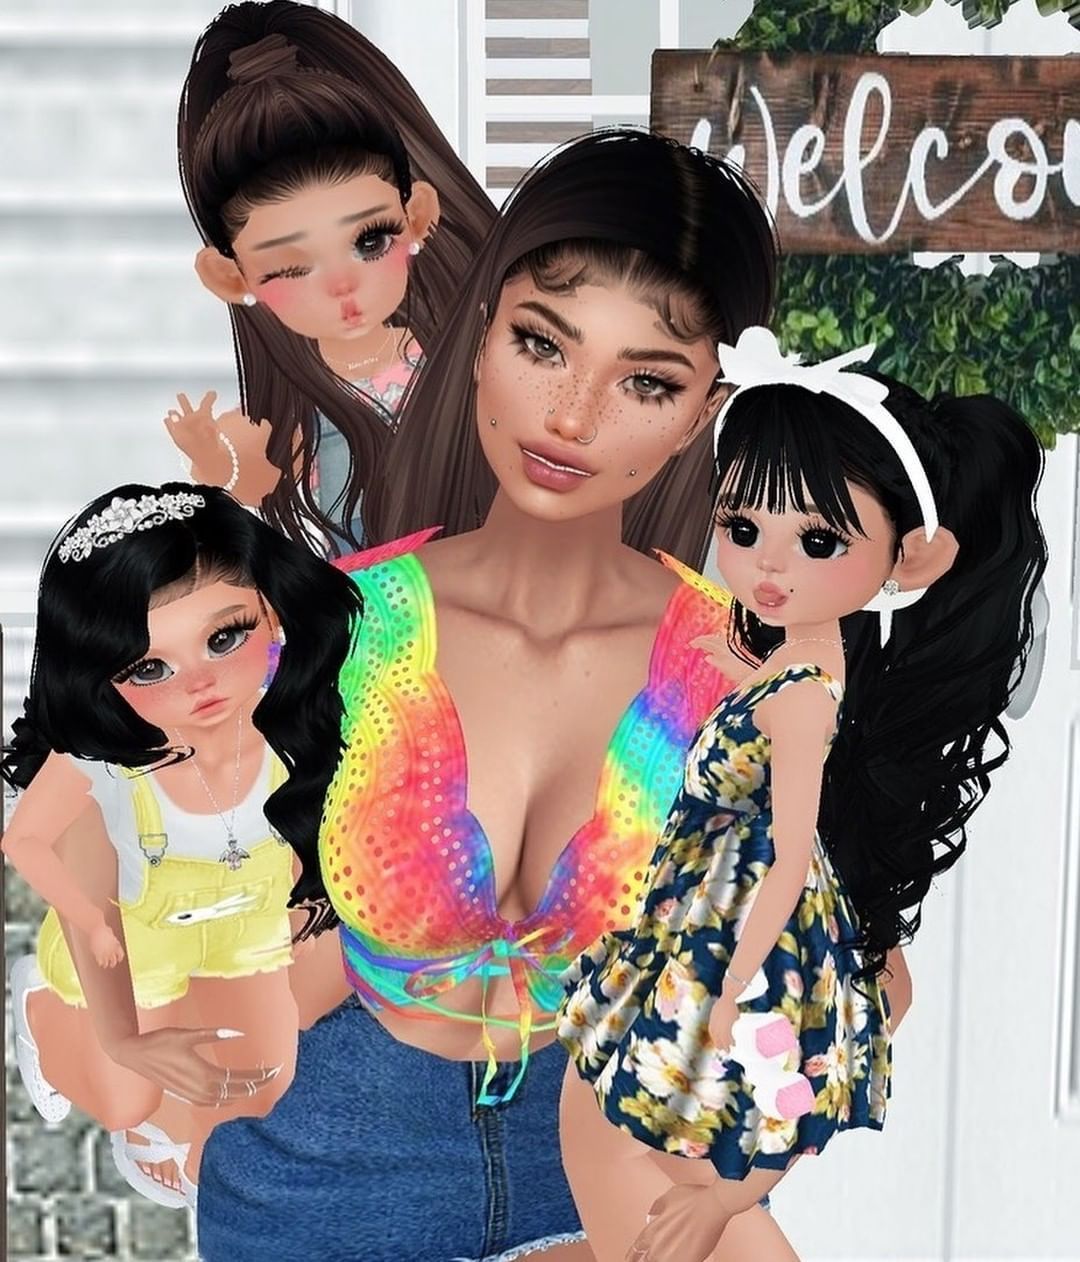 IMVU on Instagram: “Just some quality family time